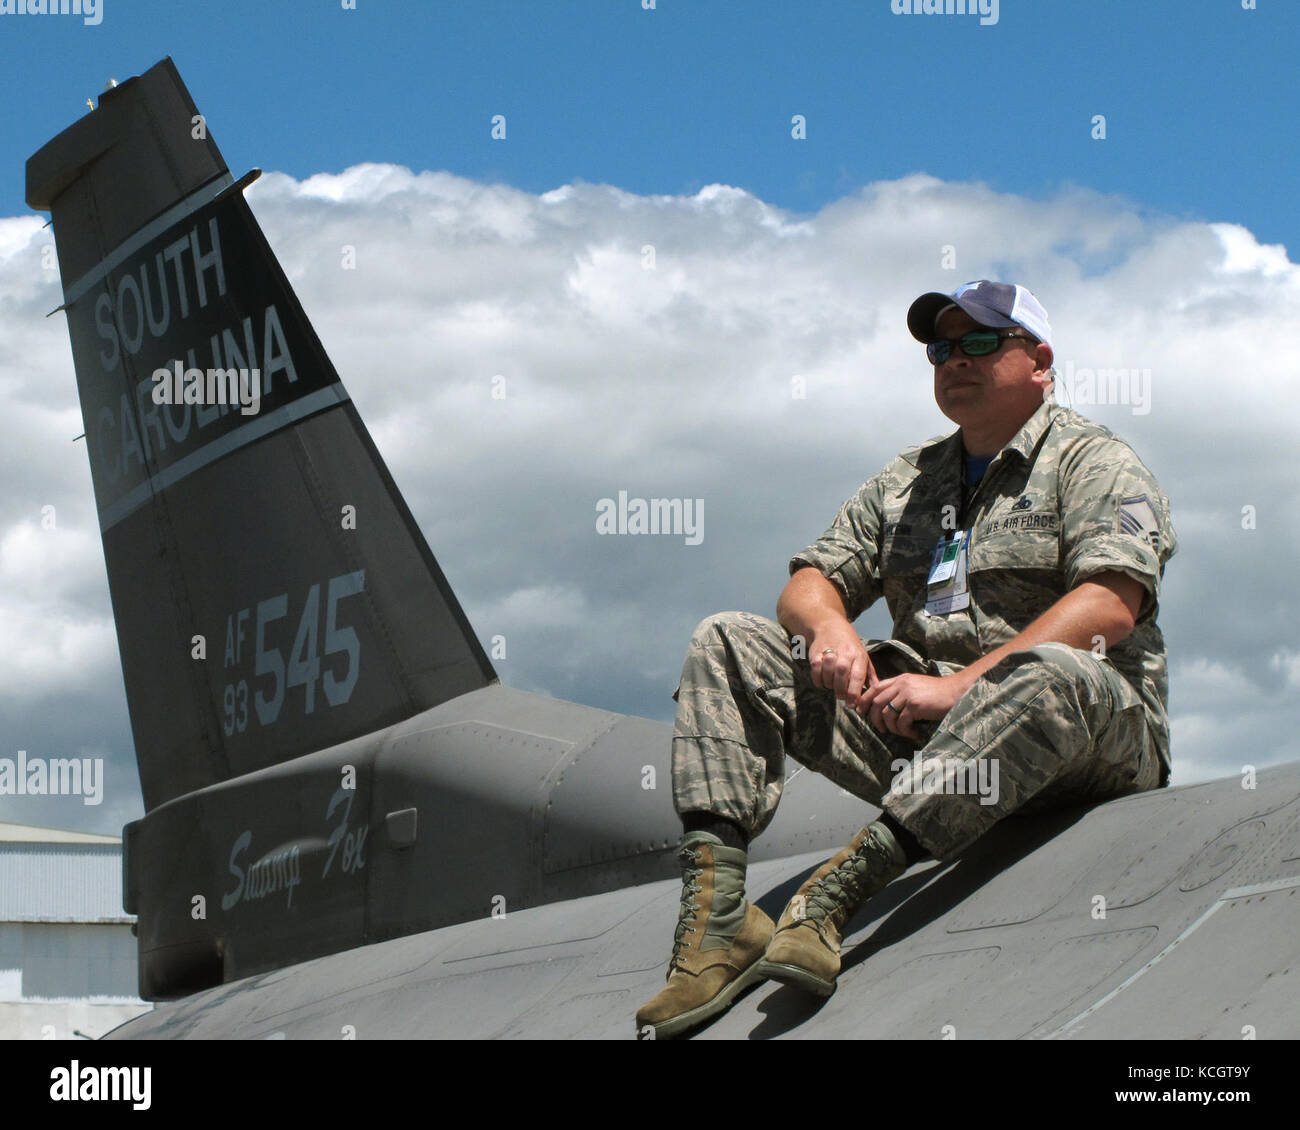 U.S. Air Force Master Sgt. Michael Glenn, a crew chief with the South Carolina Air National Guard’s 169th Aircraft Maintenance Squadron, watches the aerial demonstrations during the Colombian Air Force’s Feria Aeronautica Internaccional – Colombia in Rionegro, Colombia, July 13, 2017. The United States Air Force is participating in the four-day air show with two South Carolina Air National Guard F-16s as static displays, plus static displays of a KC-135, KC-10, along with an aerial demonstration by the Air Combat Command’s Viper East Demo Team and a B-52 flyover. The United States military par Stock Photo